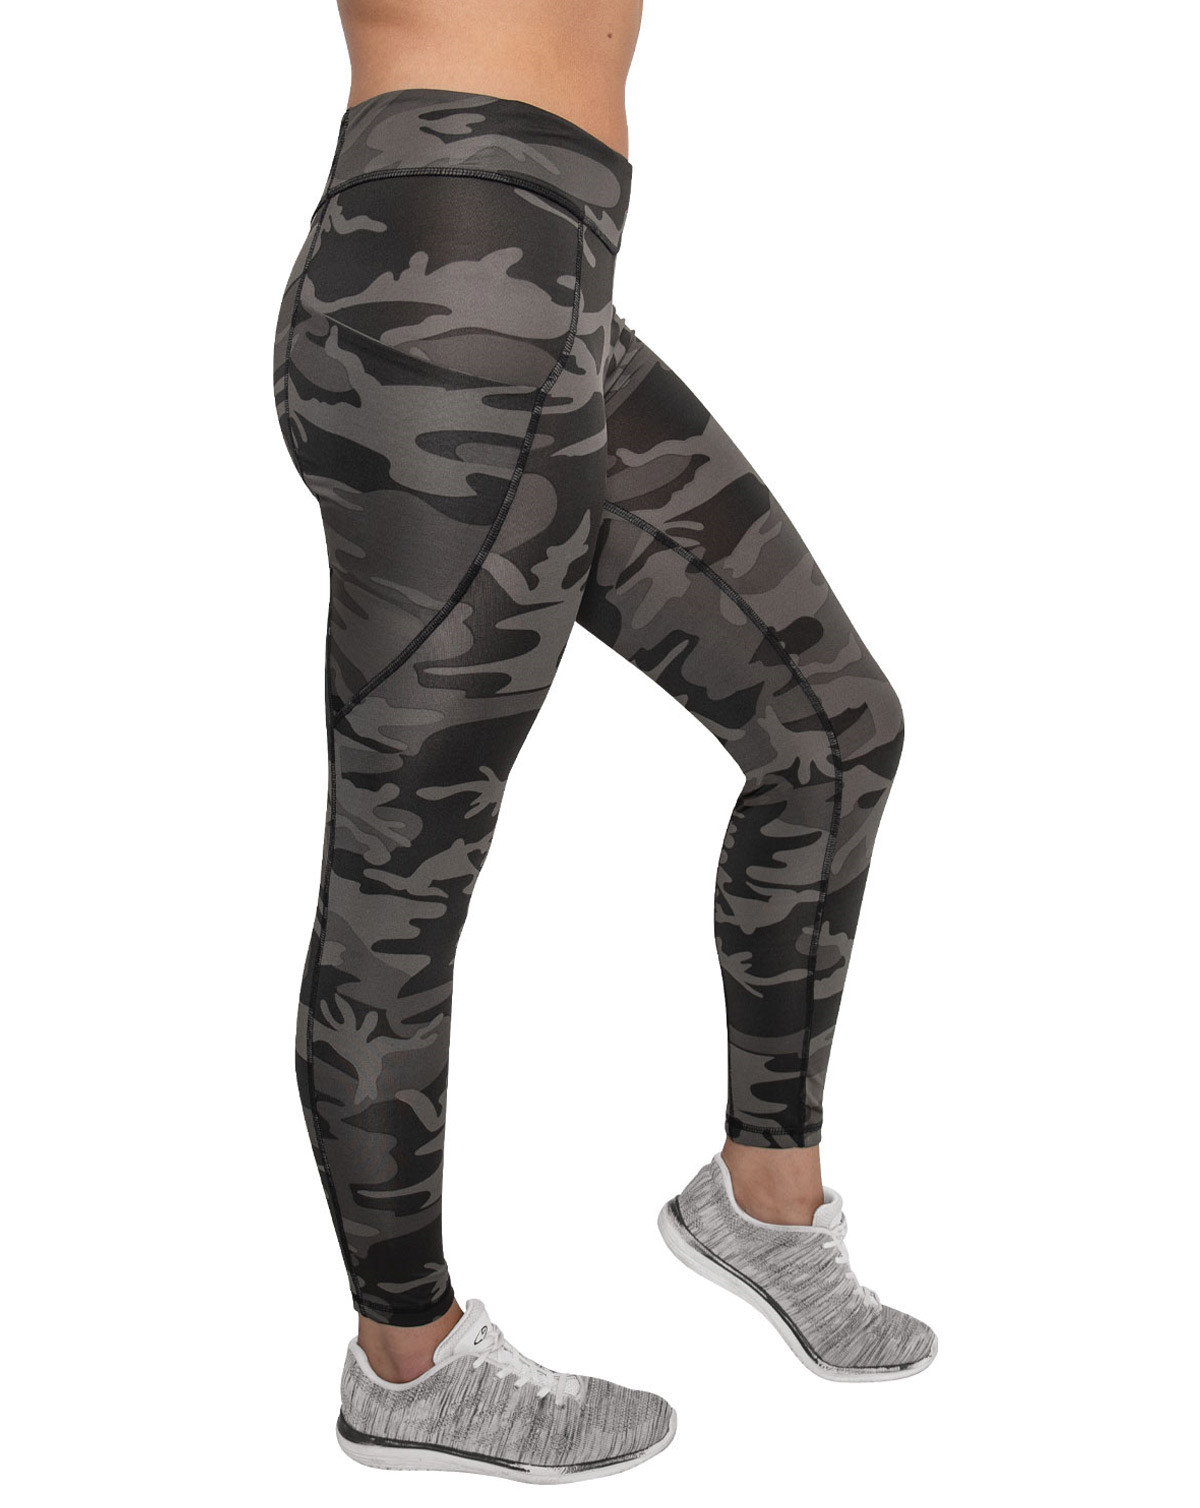 4: Rothco Womens Workout Performance Camo Leggings With Pockets (Black Camo, XS)